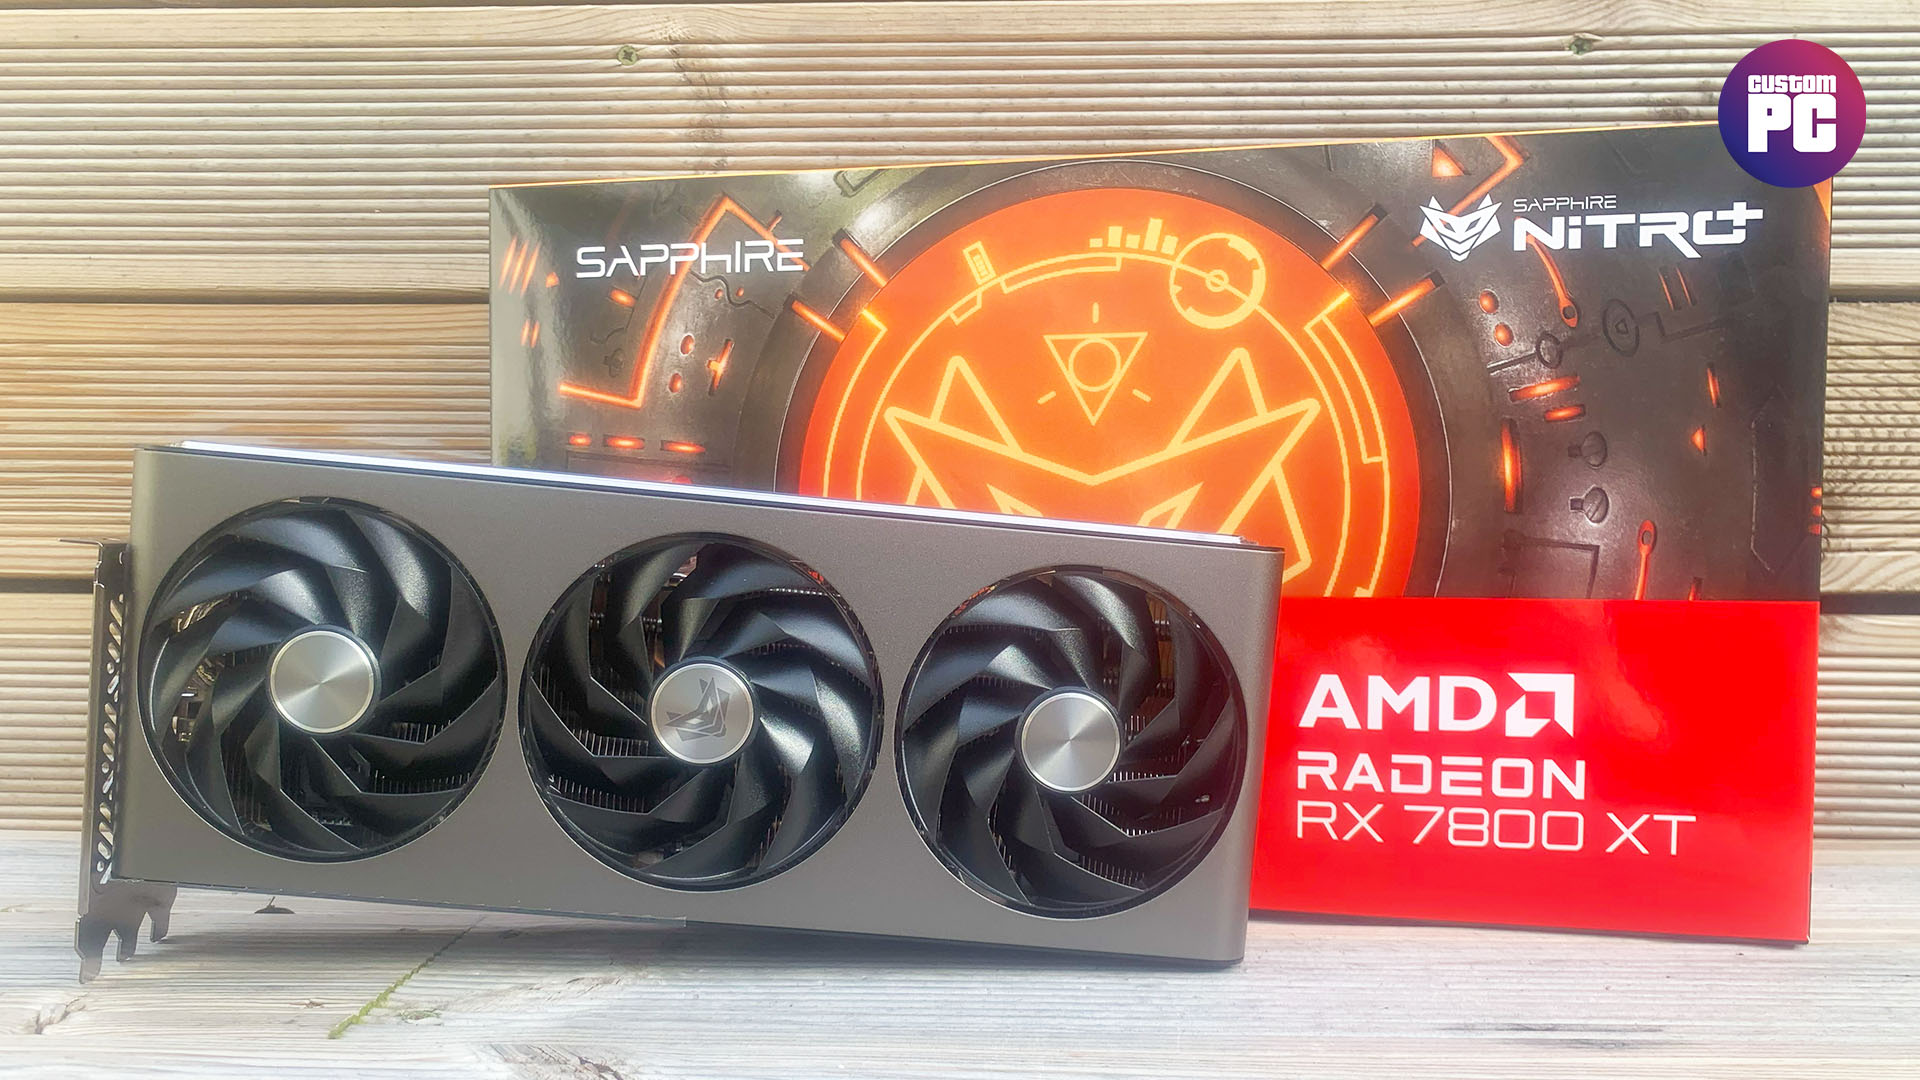 AMD Radeon RX 7800 XT Reviews, Pros and Cons